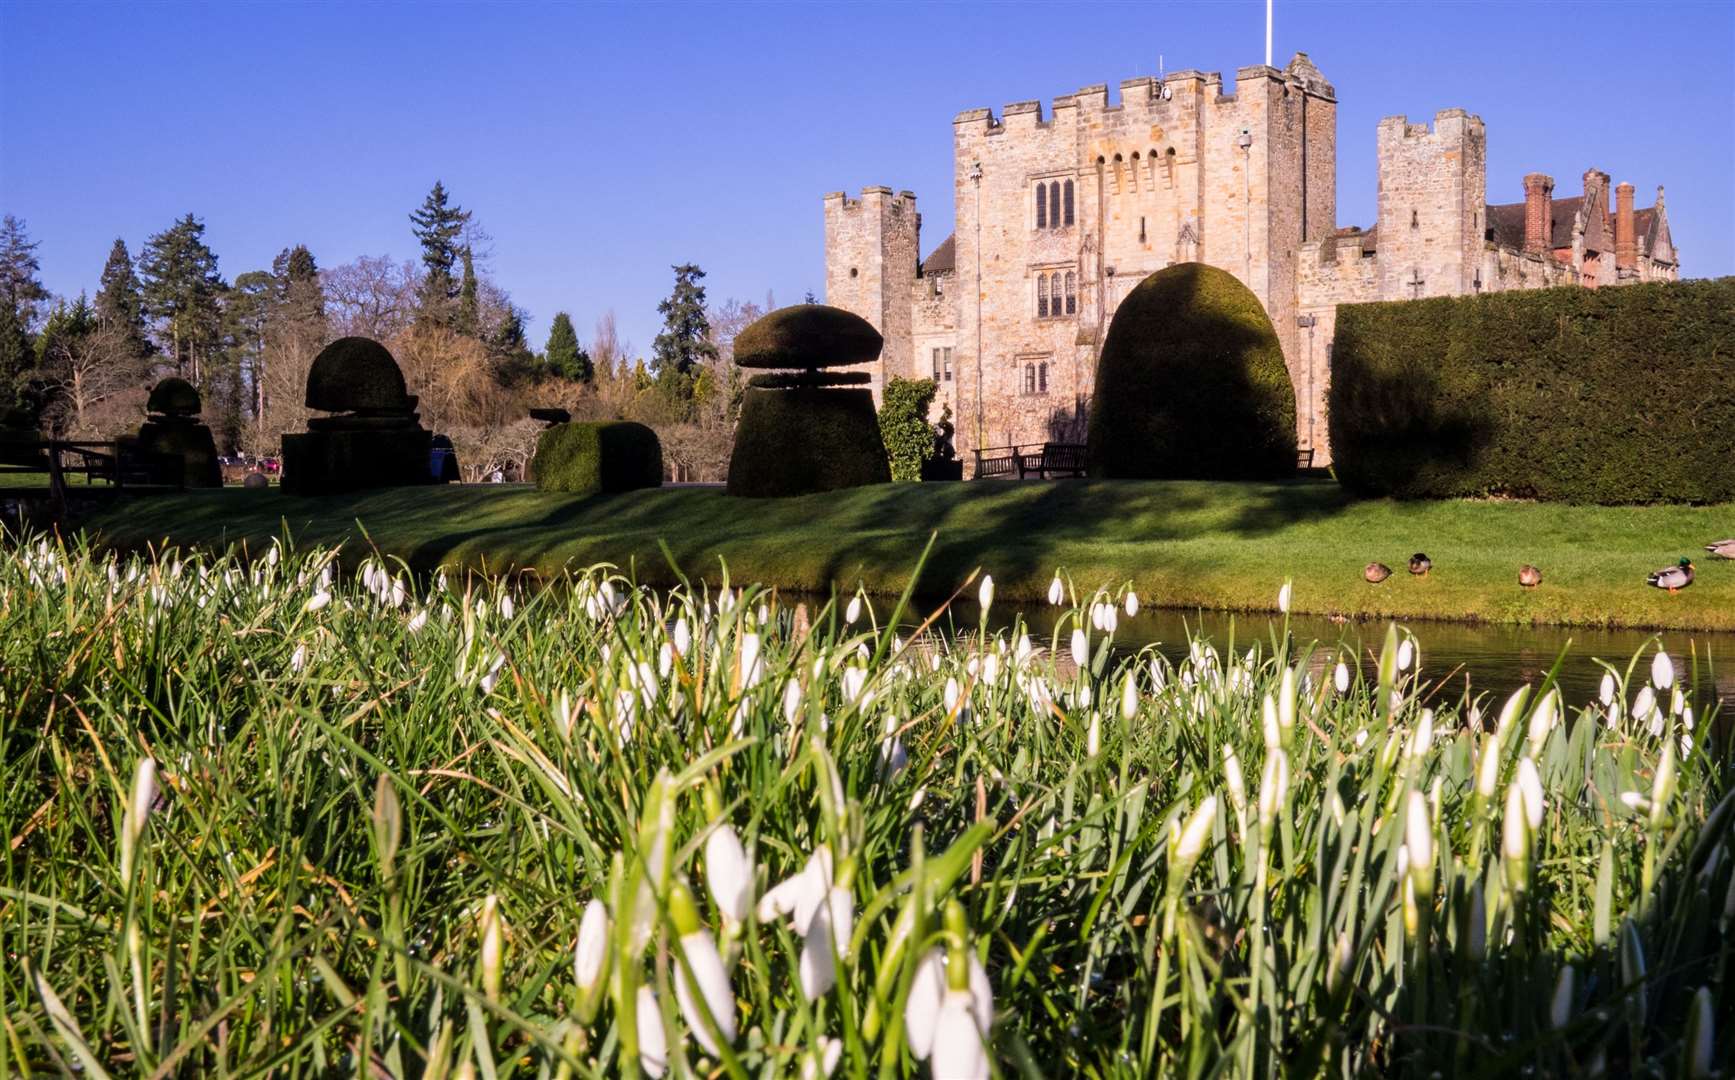 There’s set to be more than 140,000 snowdrops dotted around the grounds at Hever Castle this year. Picture: Hever Castle and Gardens